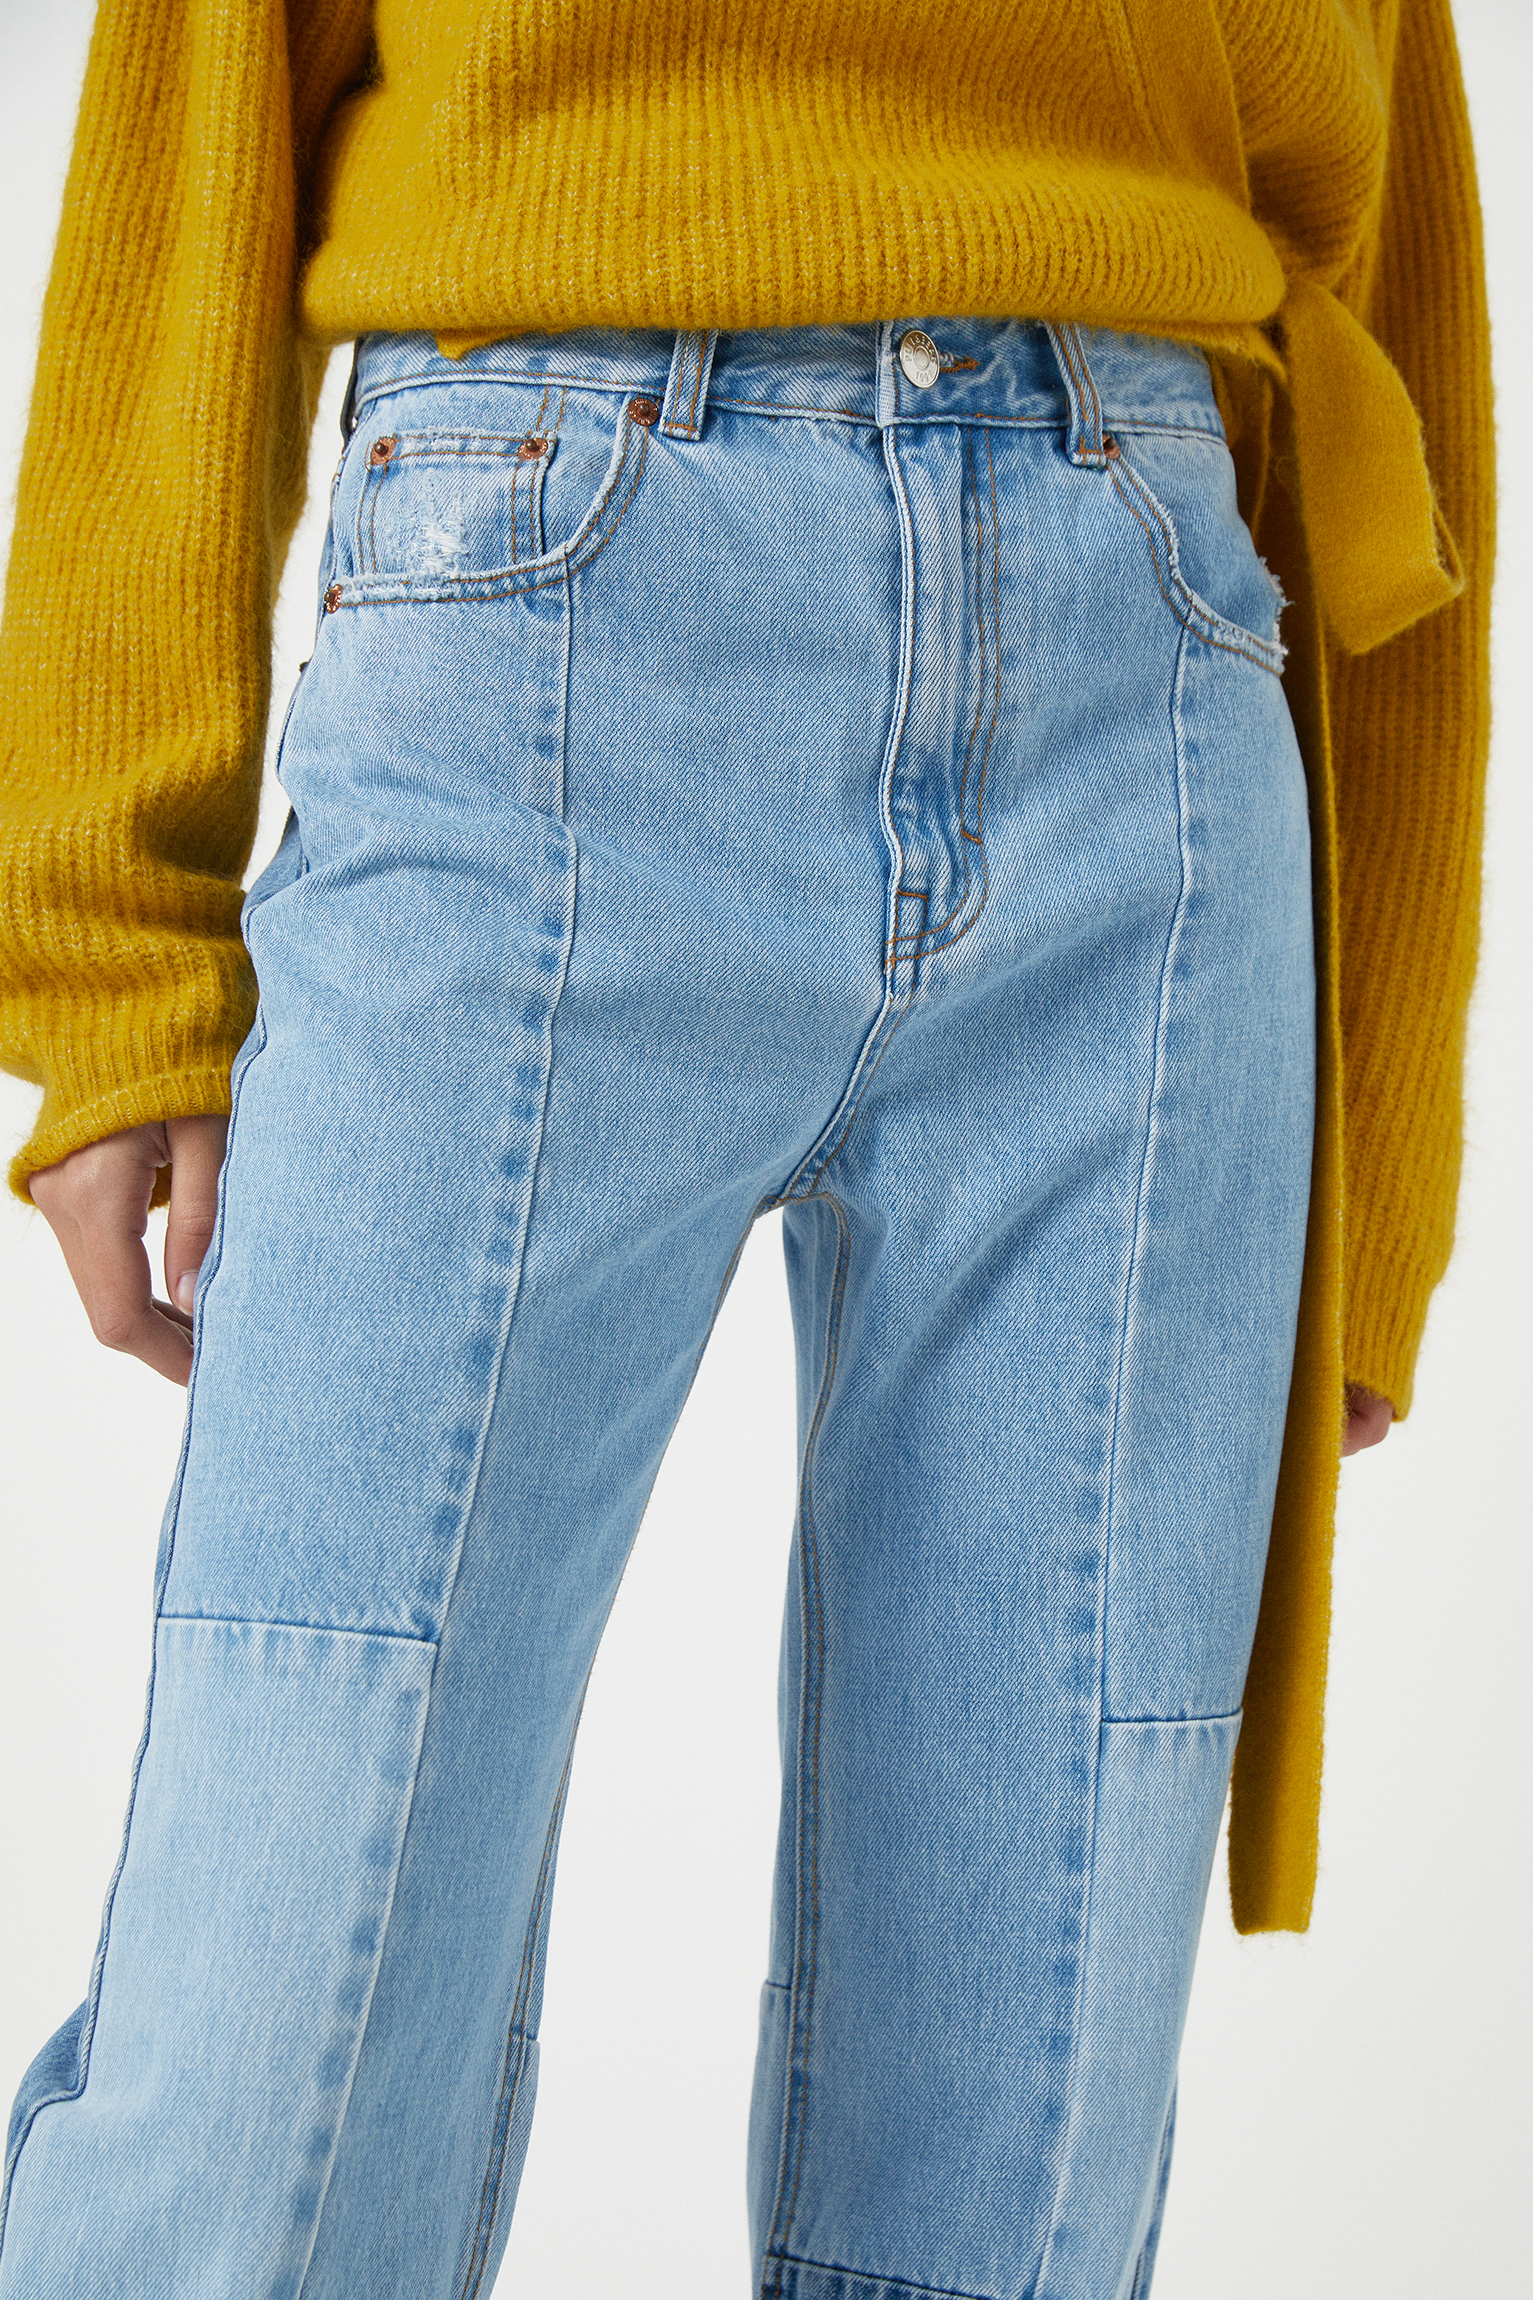 pull and bear denim collection